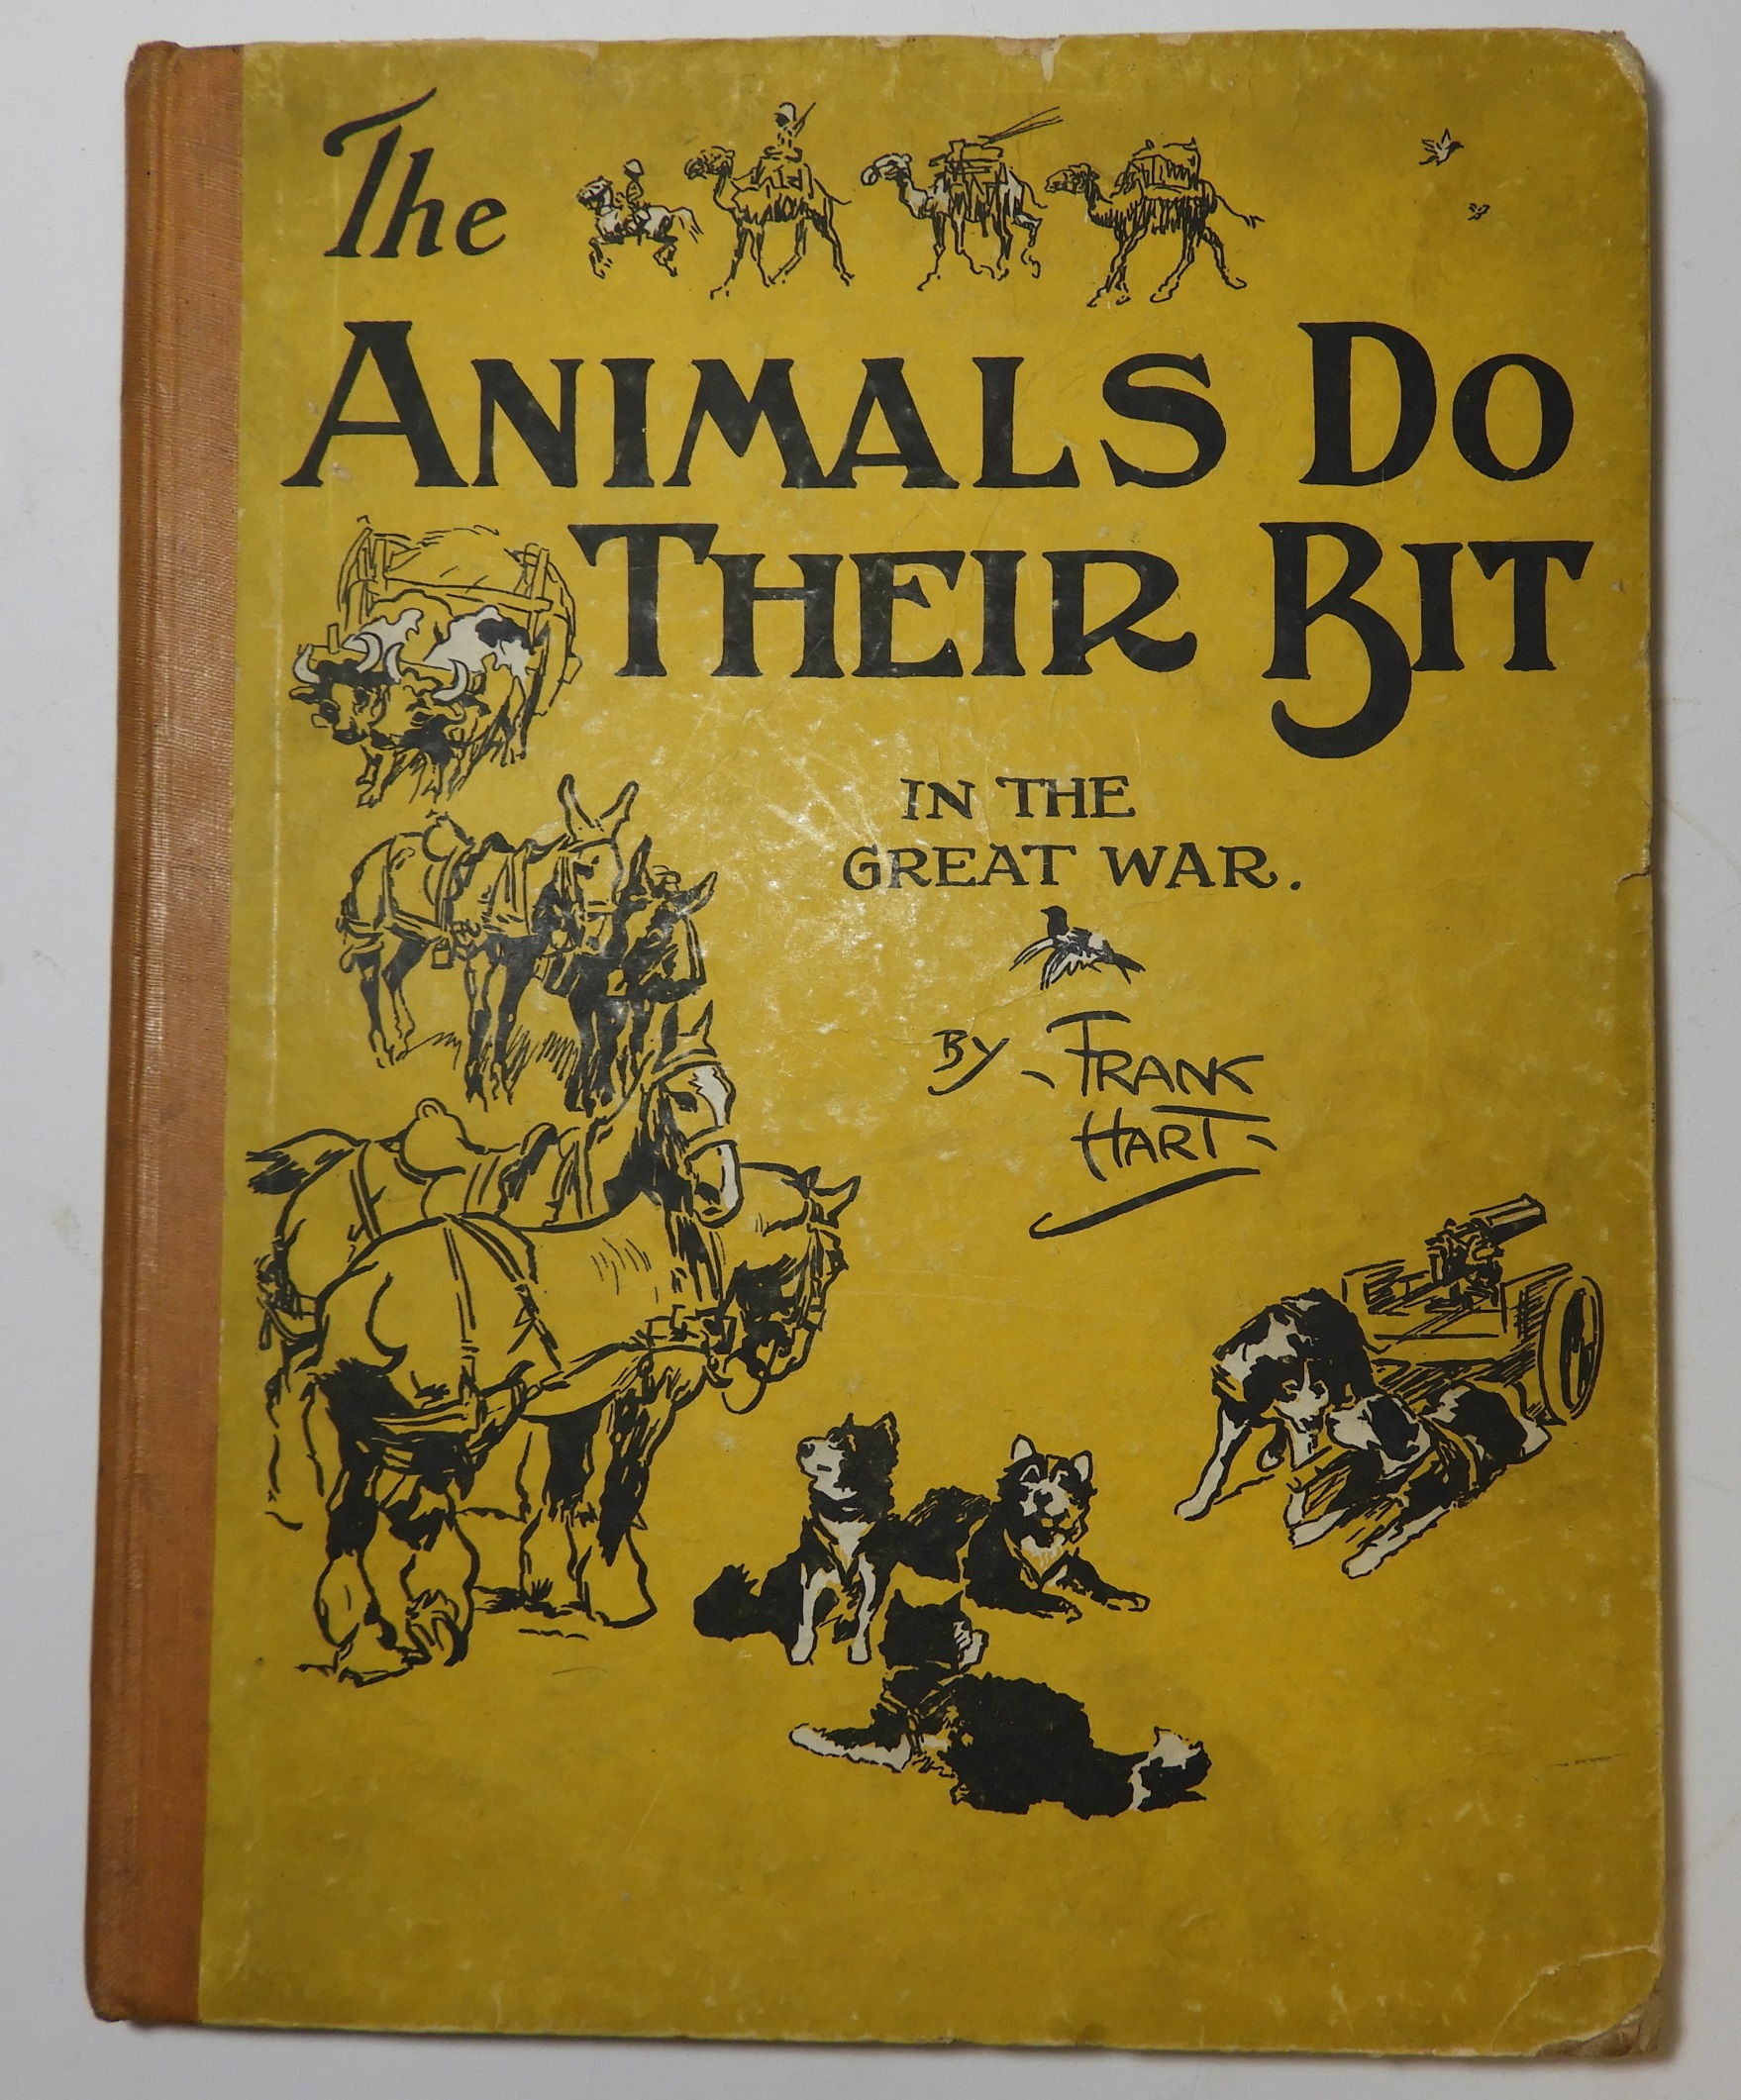 WW1 BOOK 'THE ANIMALS DO THEIR BIT' WRITTEN & ILLUSTRATED BY FRANK HART